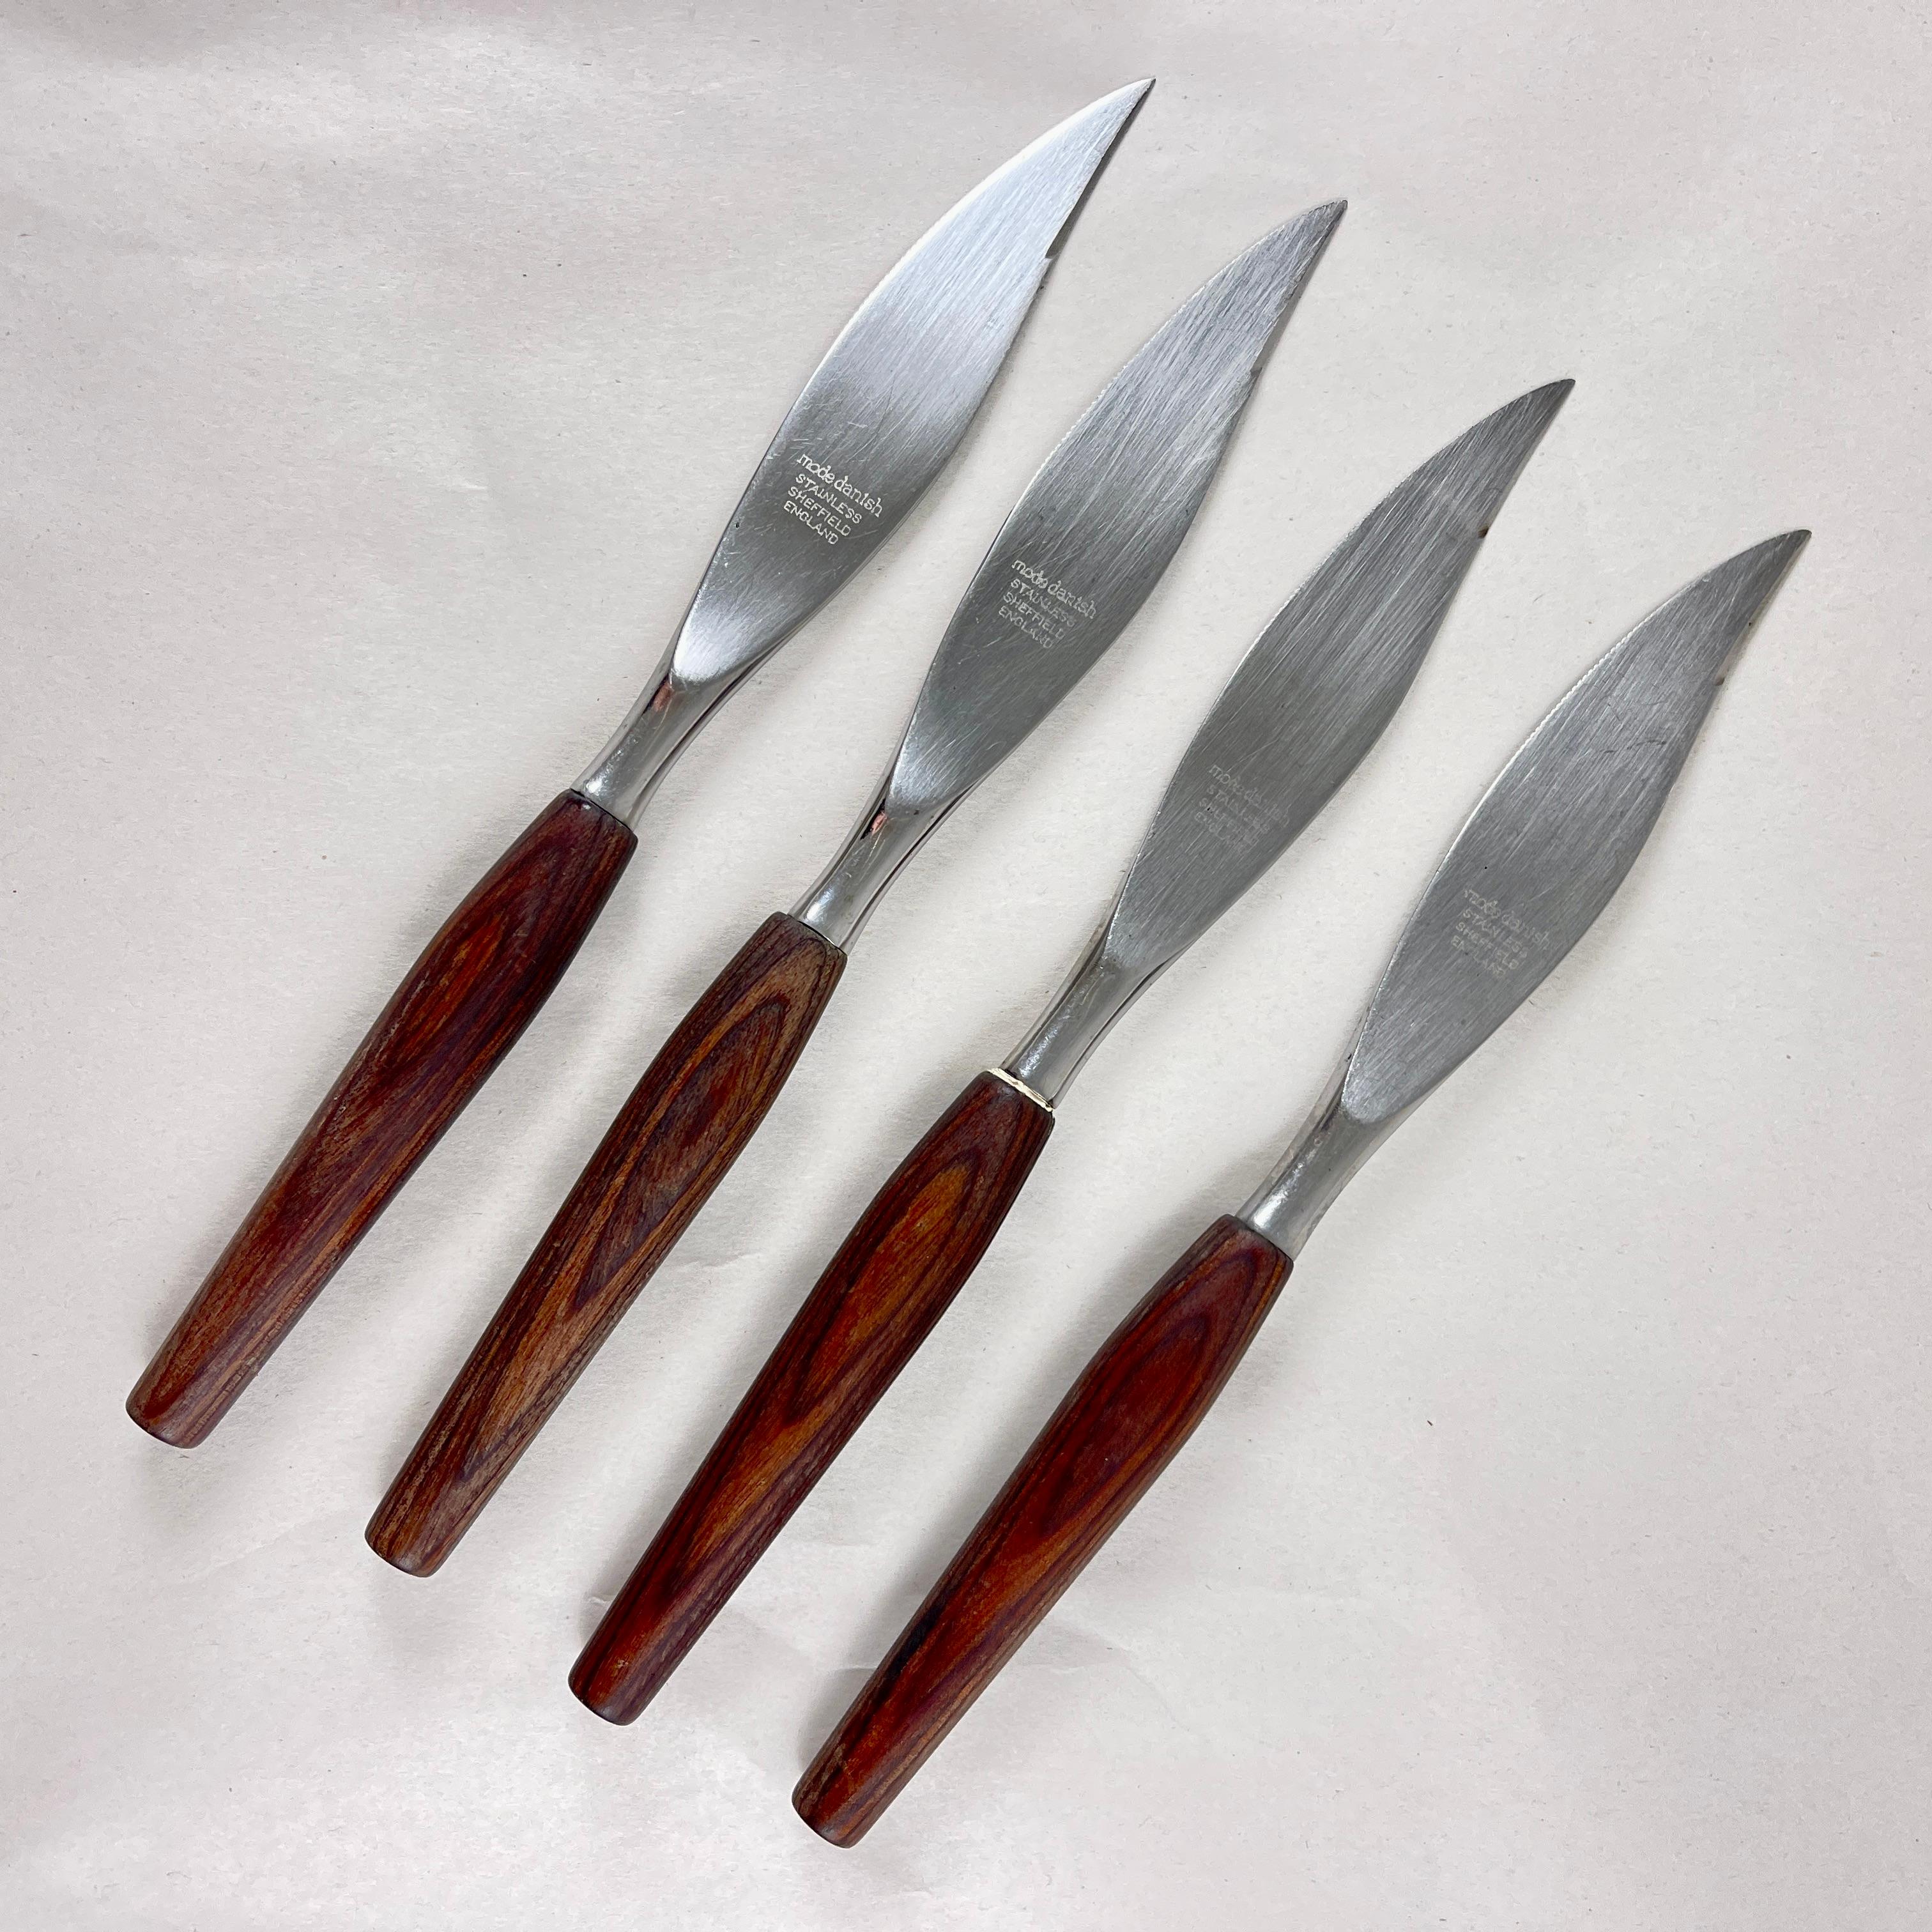 A Mid-Century Modern style set of four Stainless Steel knives made in Sheffield, England, circa 1960s.

From the ‘Mode Danish’ line, beautifully polished Teakwood handles are securely joined to leaf shaped blades.

The blades are partly serrated